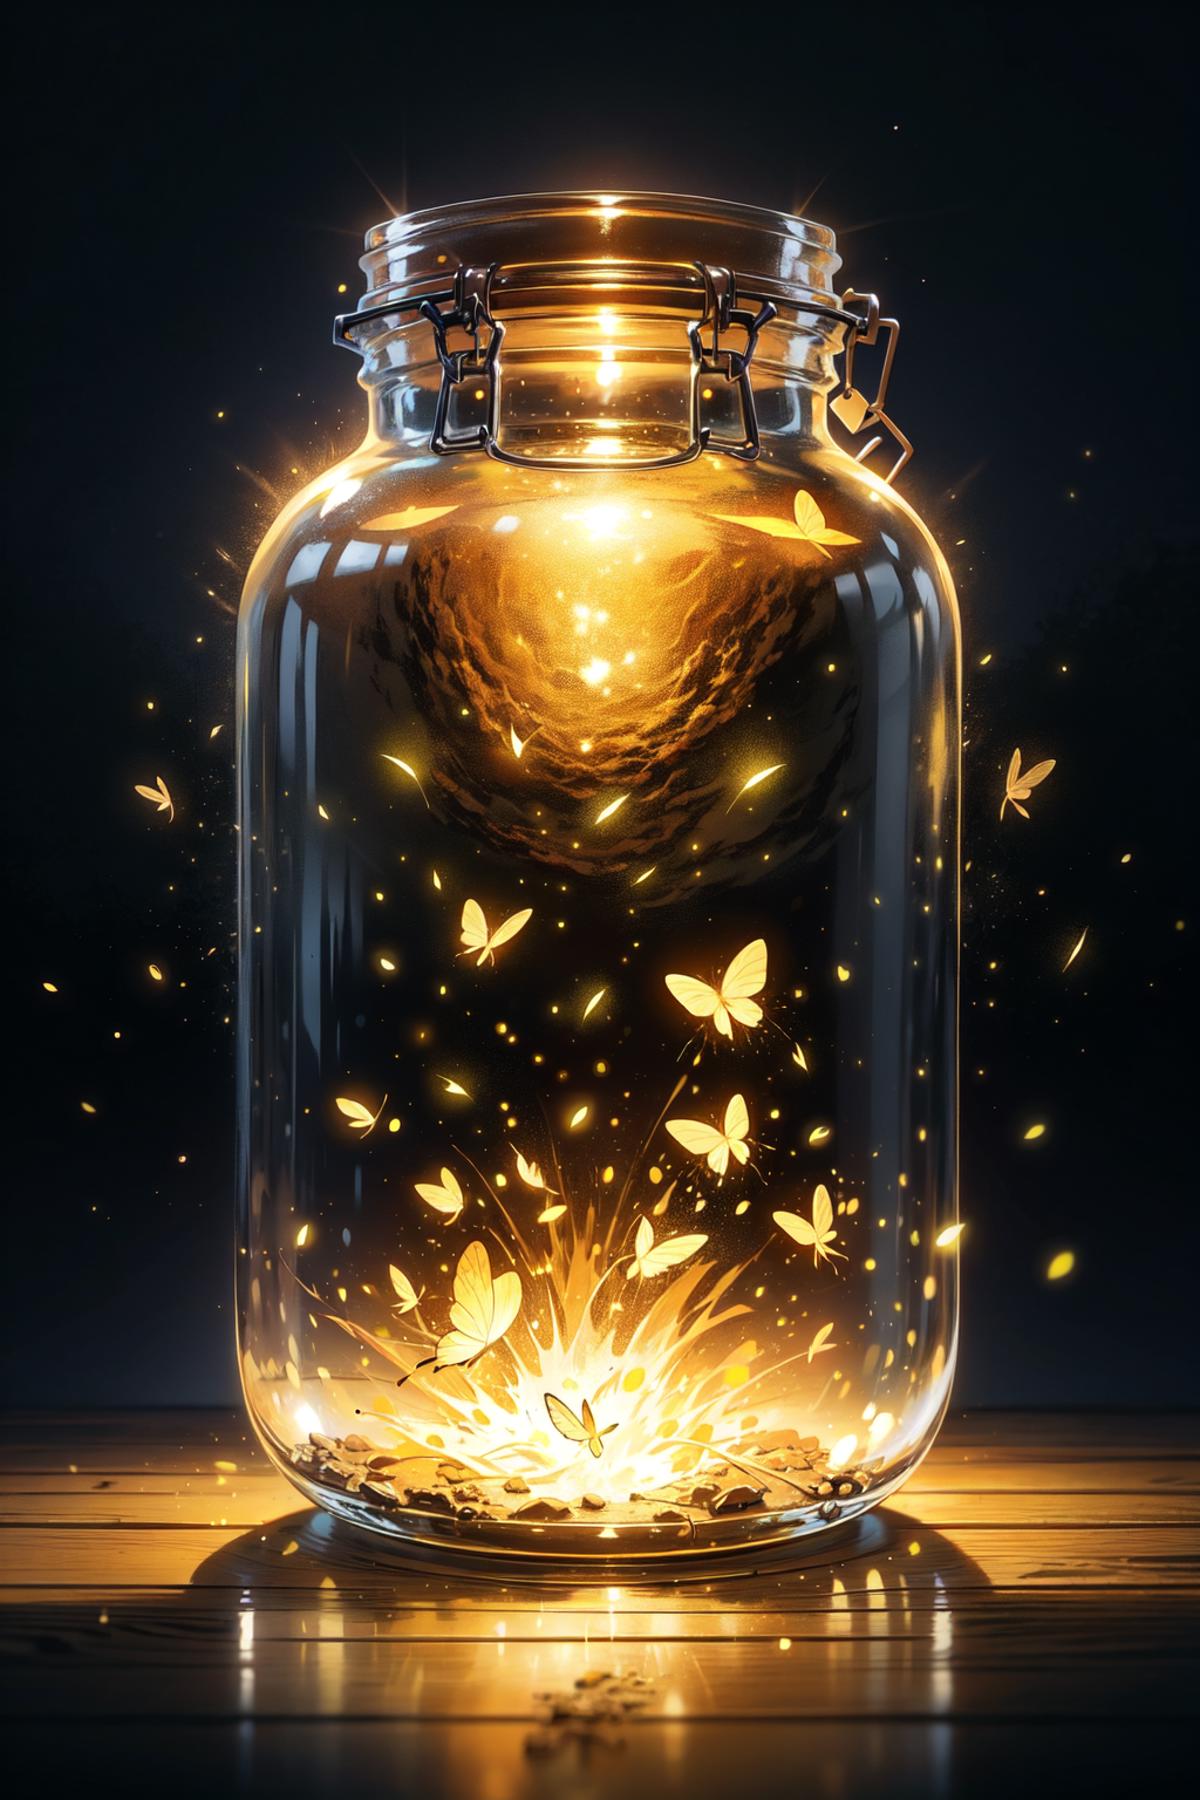 A large glass jar filled with butterflies and gold coins, in front of a dark background.